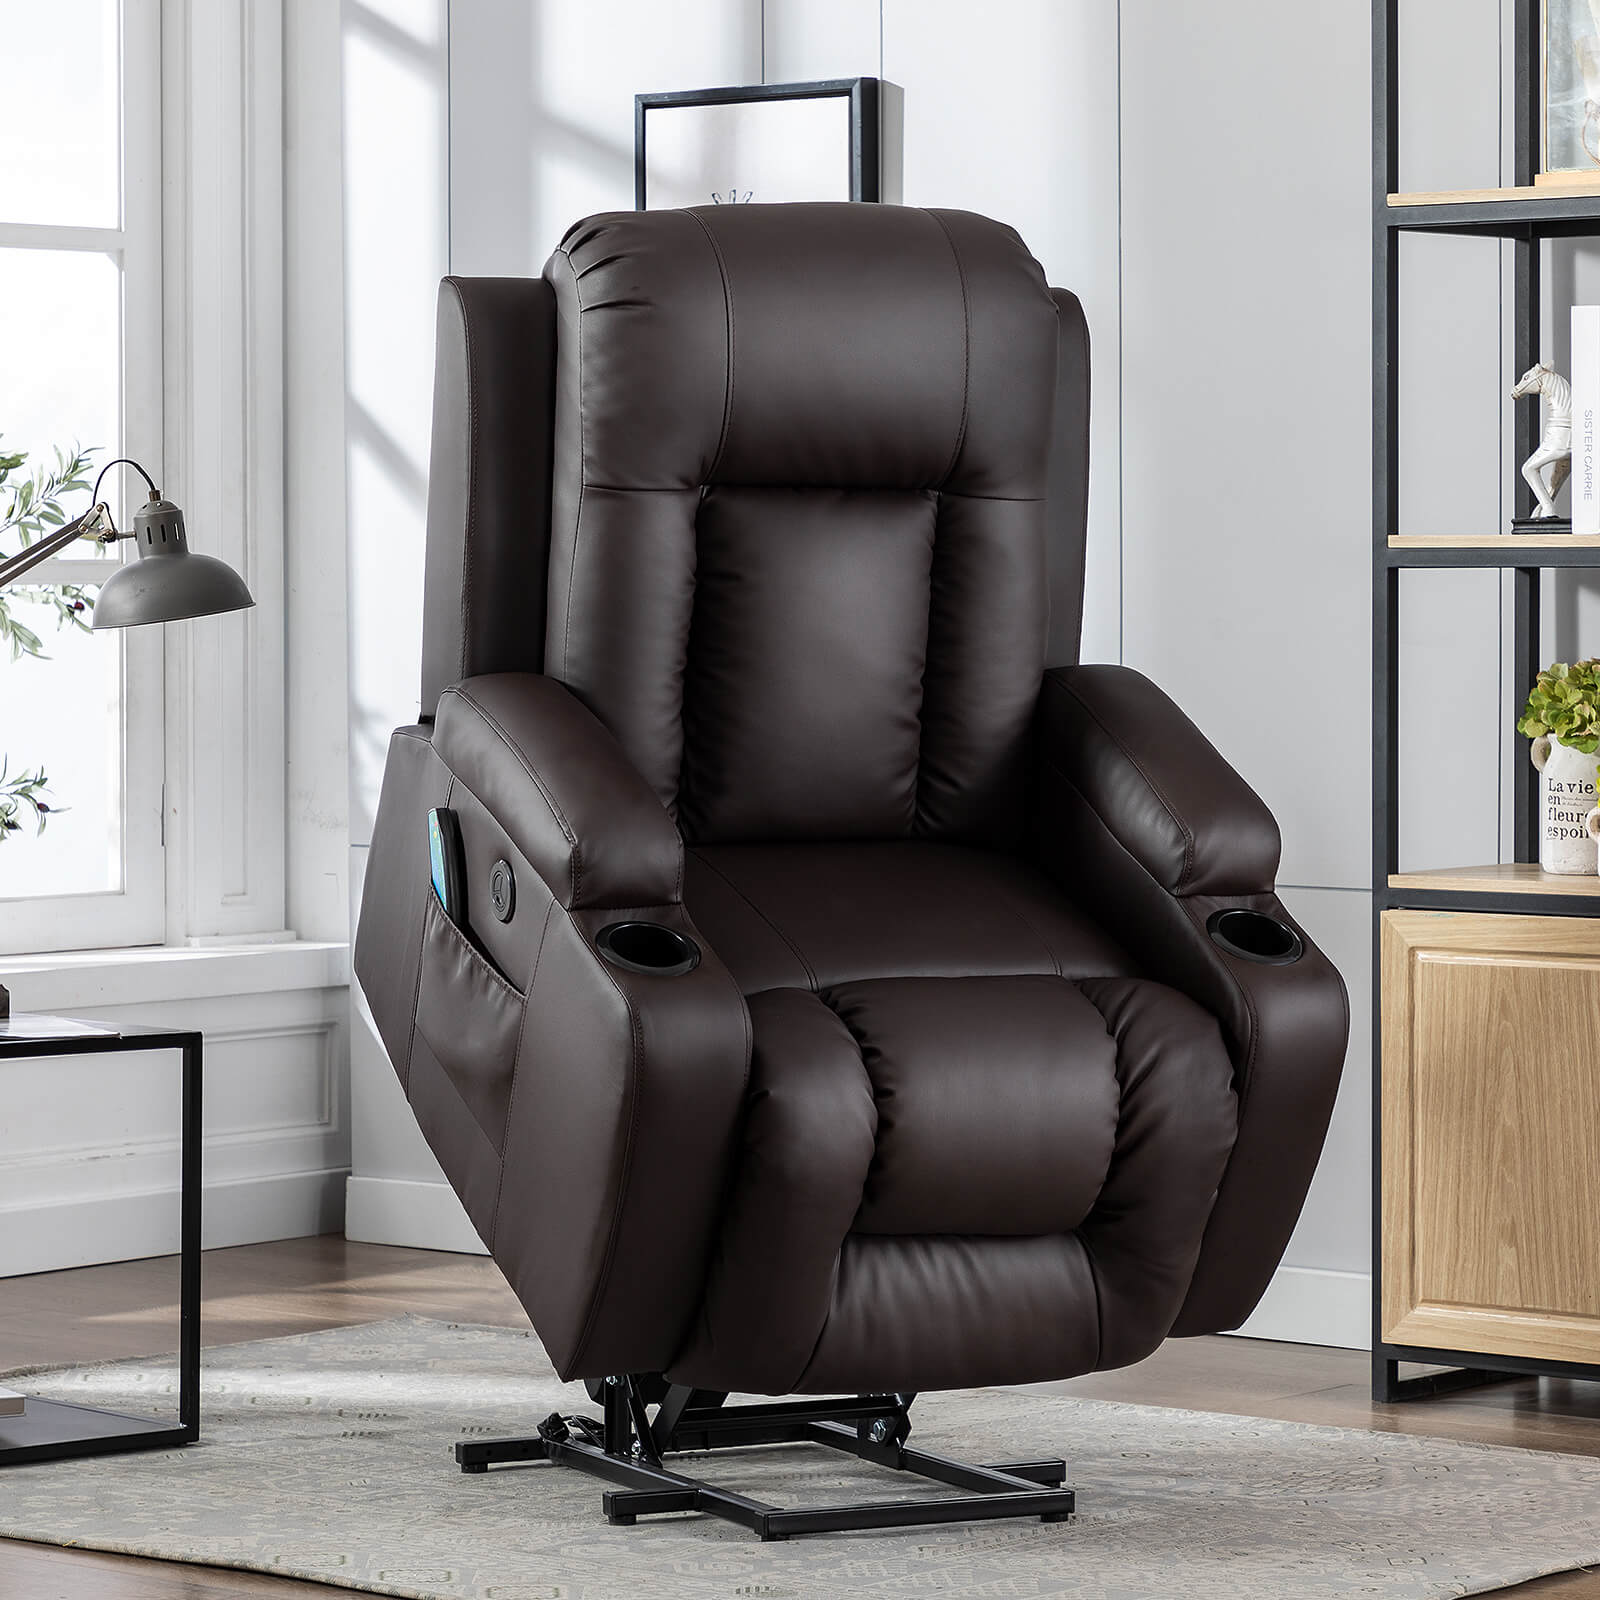 power-lift-recliner-chair-with-massage-heat-for-elderly-pu-leather-brown